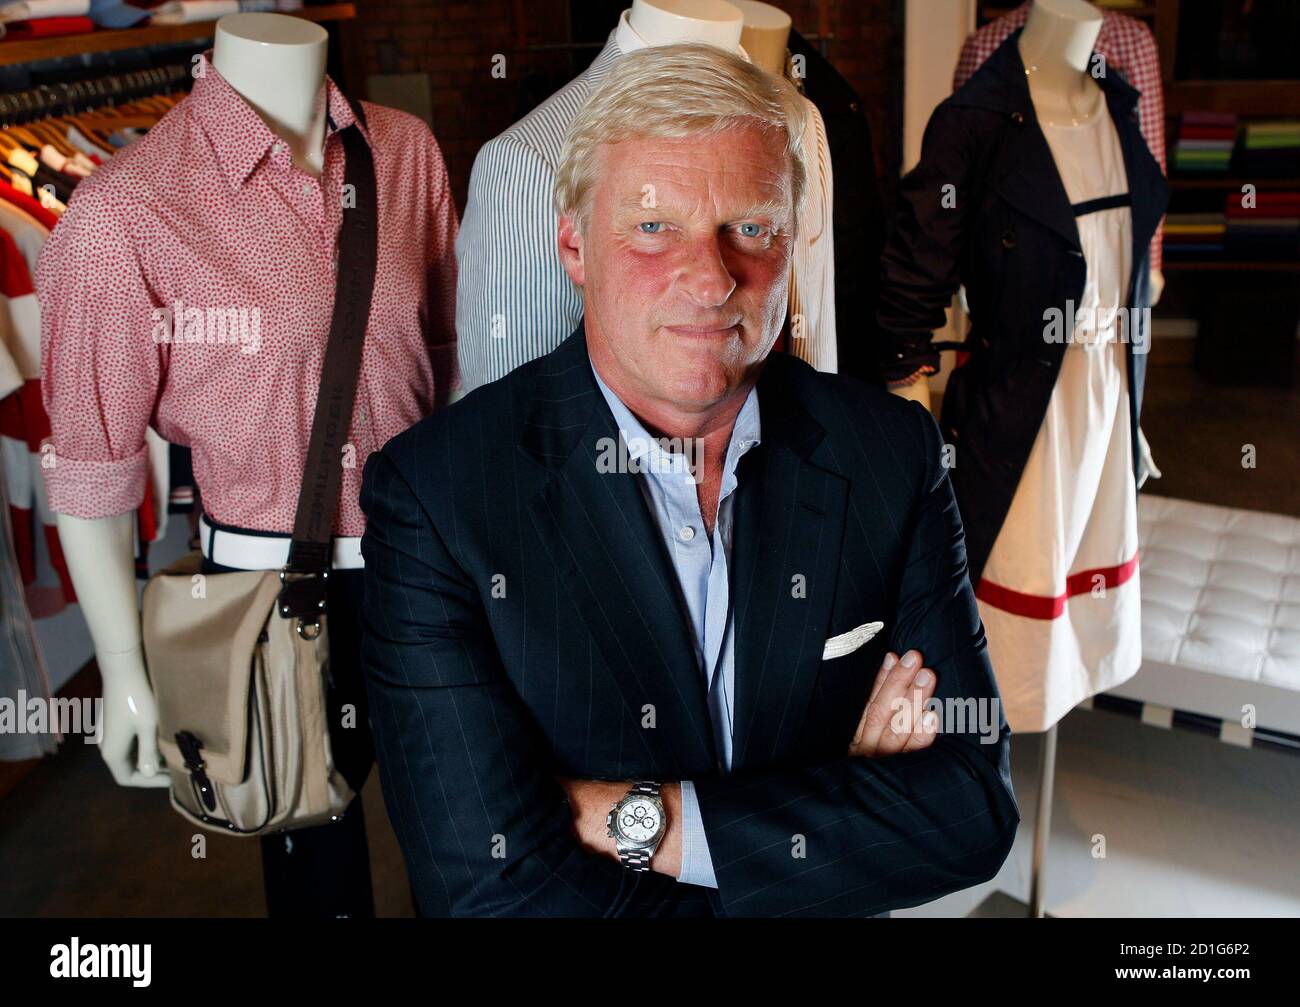 Chief executive officer of Tommy Hilfiger Corporation, Fred Gehring, poses  for a photograph in the company's Regent Street showroom in London  September 22, 2008. U.S. fashion chain Tommy Hilfiger has not seen